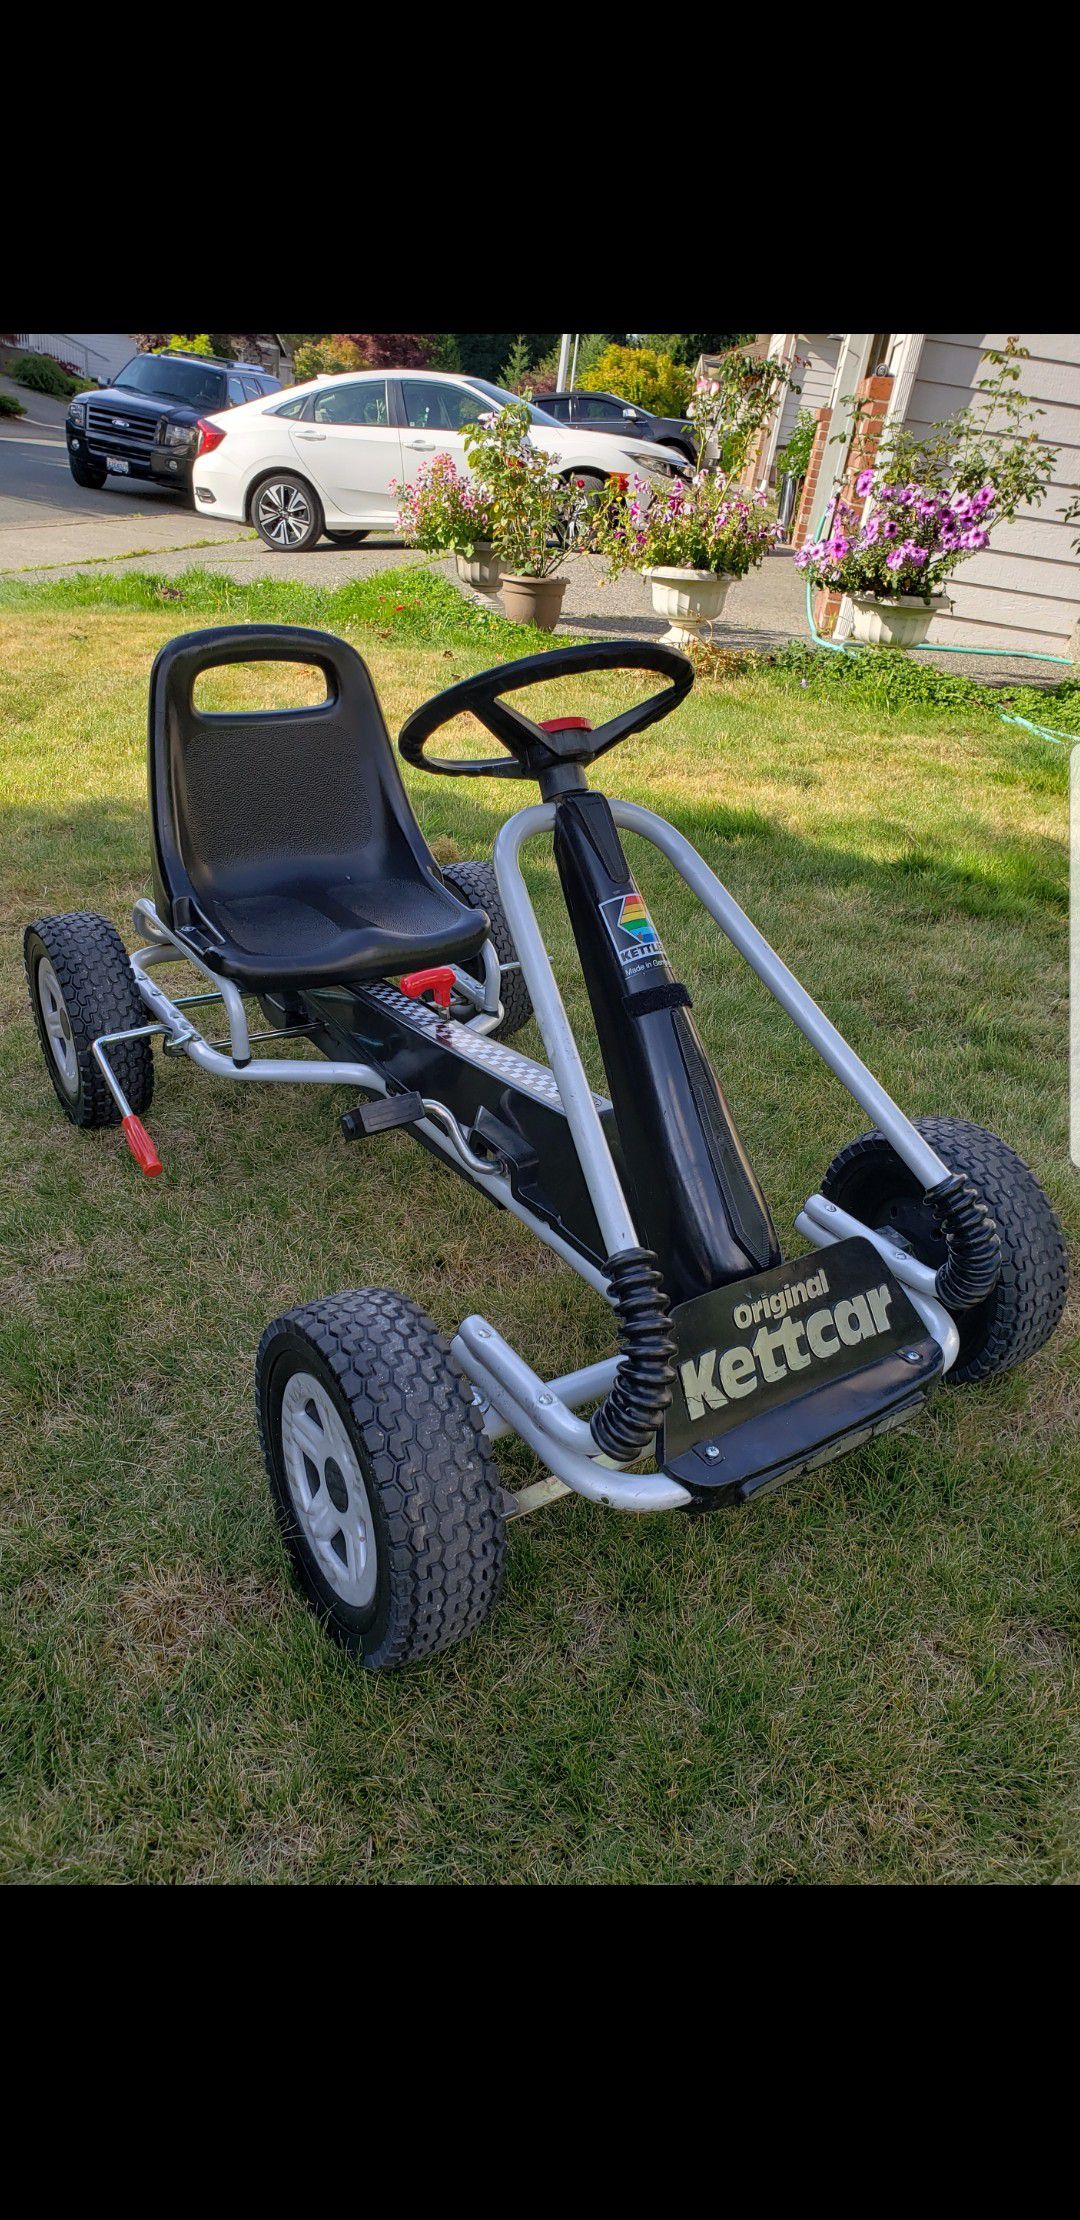 Original kettcar made in Germany, don't need it anymore